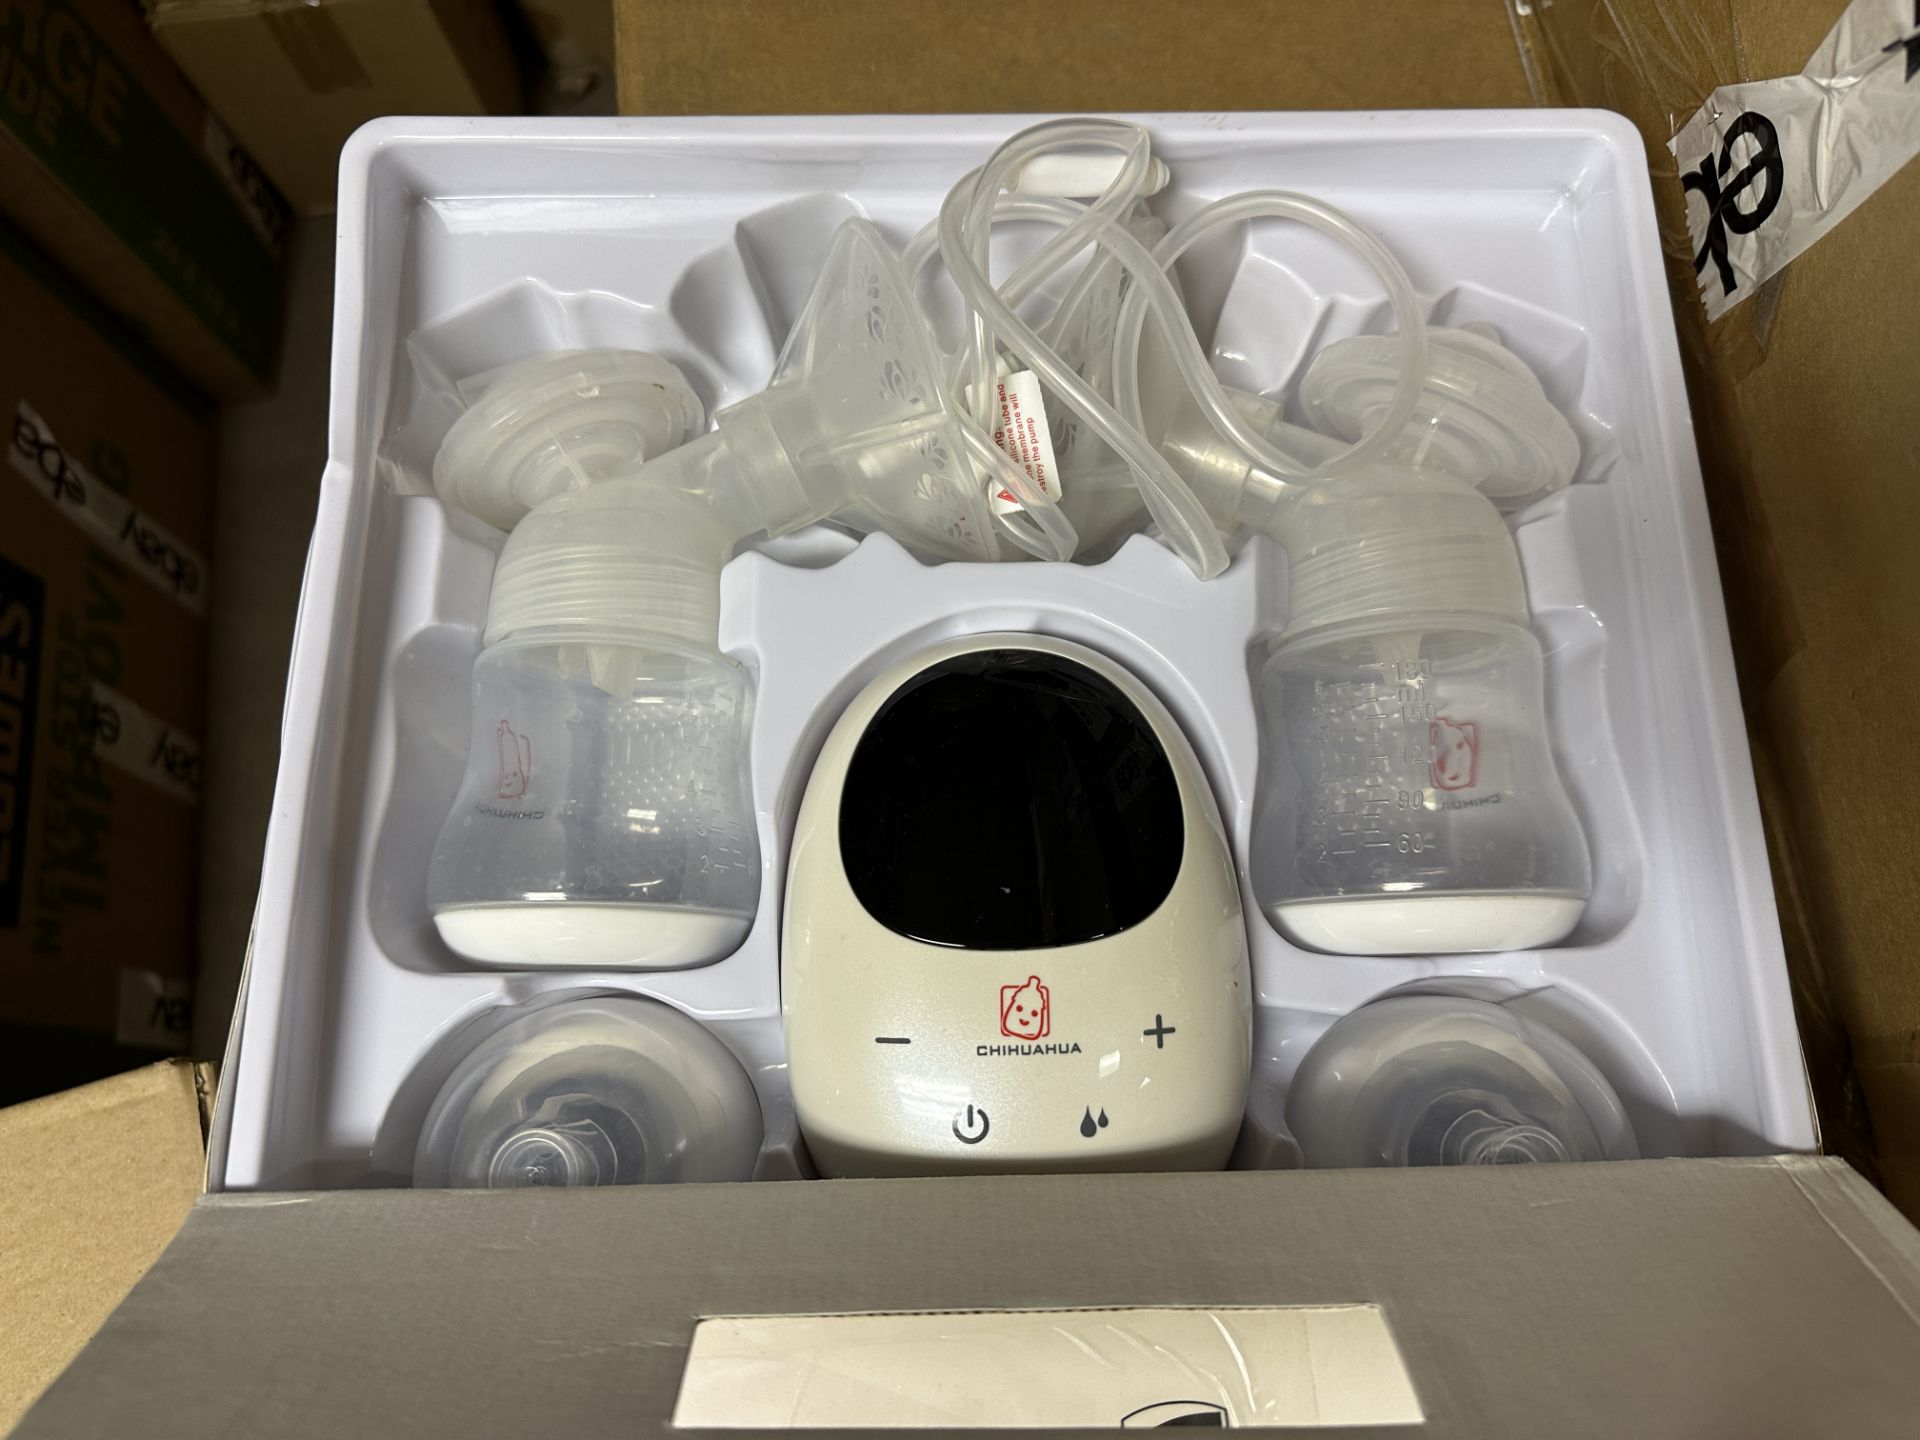 Chihuahua Popable Electric LCD Breast Pump in Box - Image 2 of 3